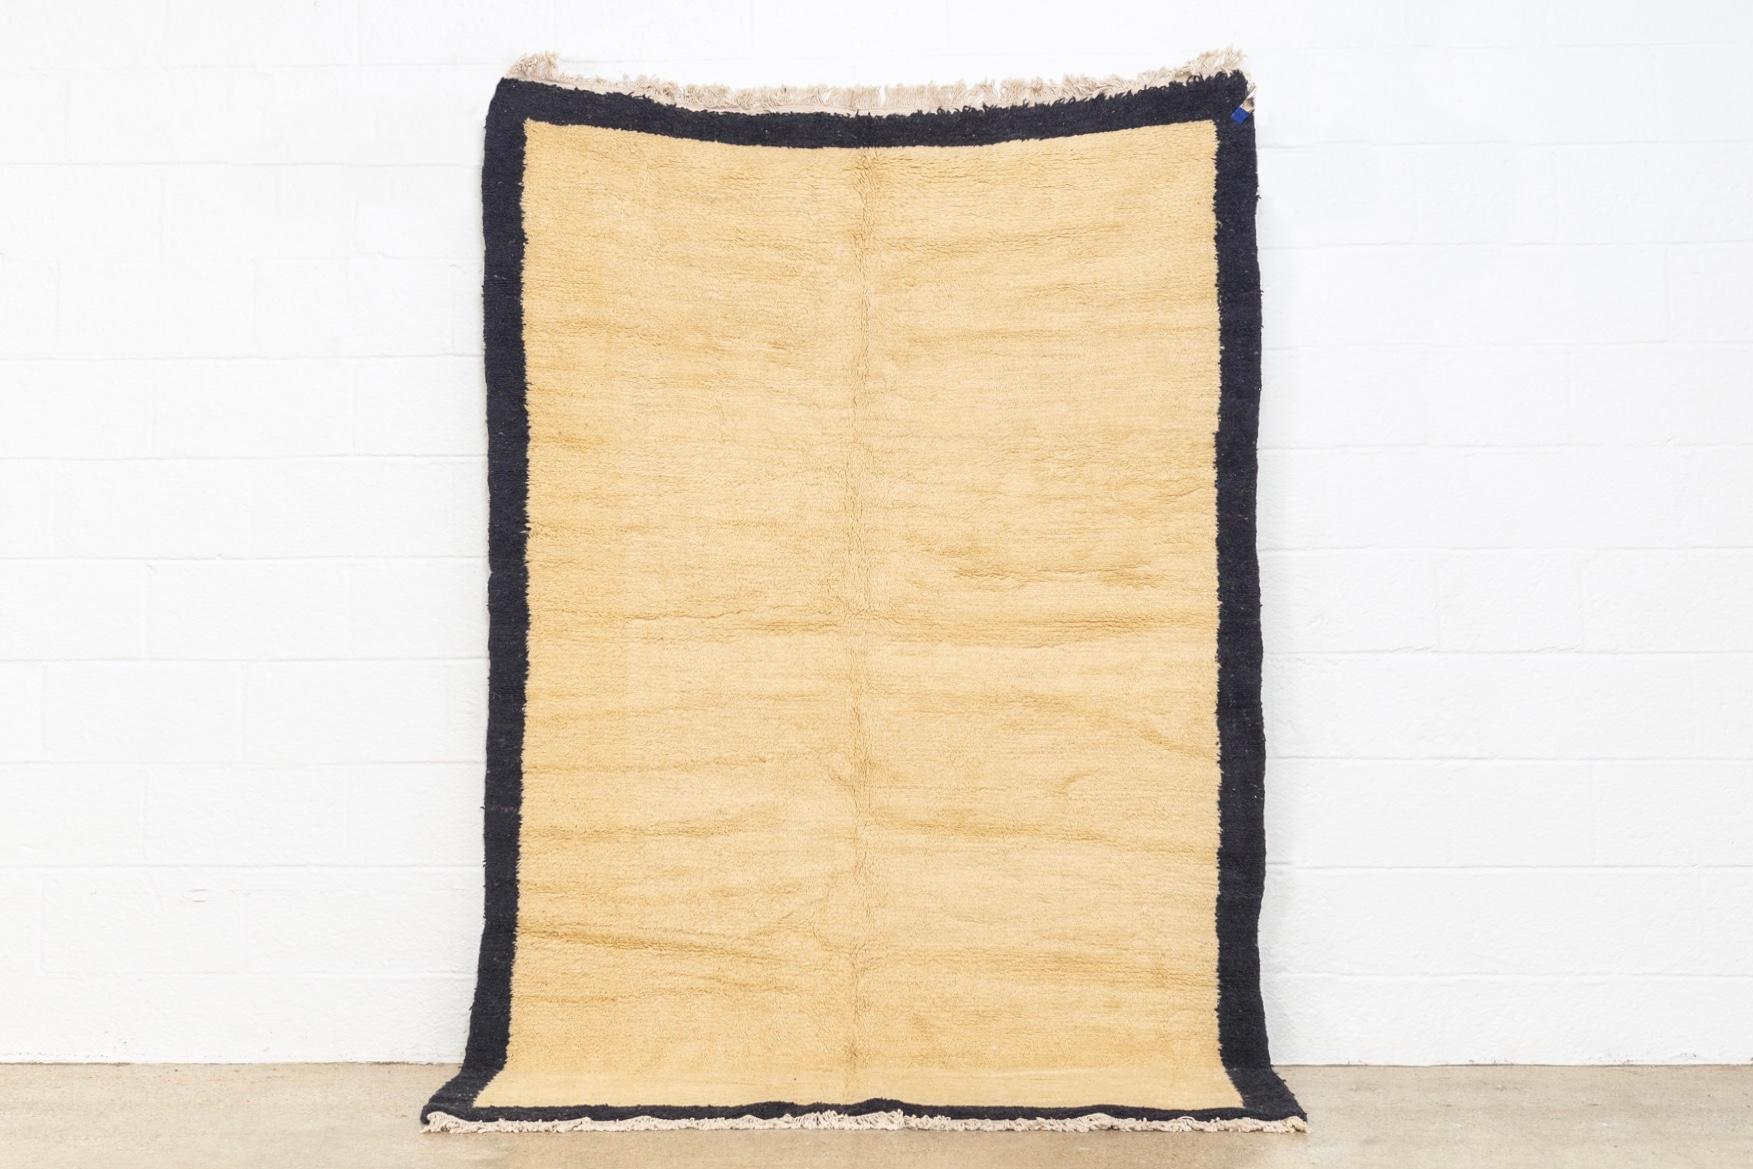 This vintage handwoven Anatolian wool floor rug features an abstract, minimalist design with an open oatmeal tan field within a solid black border. The medium wool pile is finished with a natural cotton warp fringe to both ends. This authentic